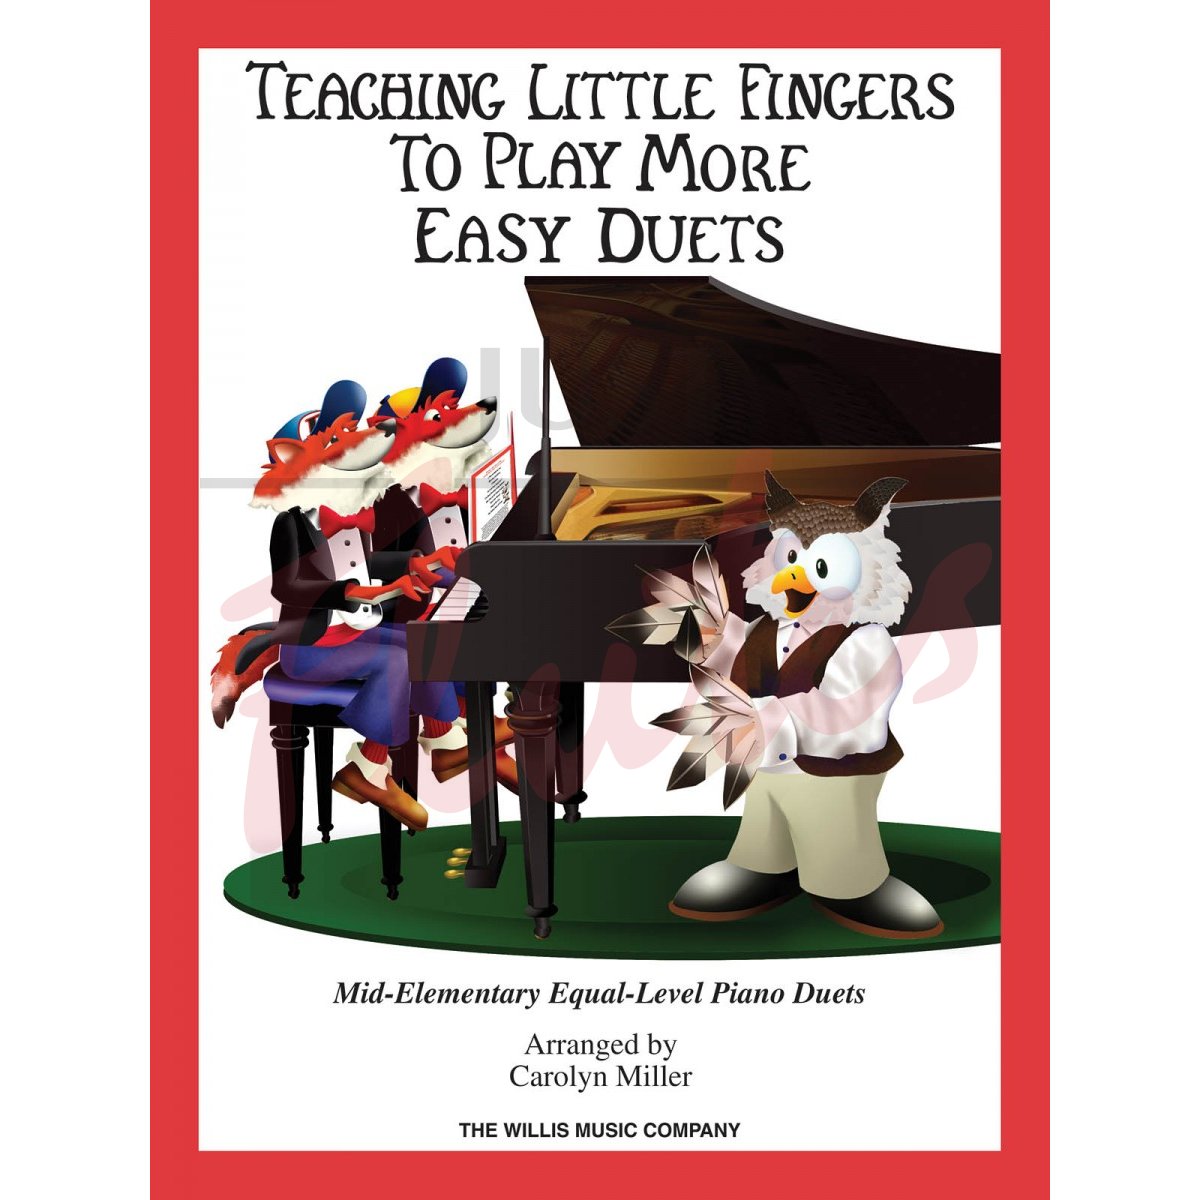 Teaching Little Fingers To Play More Easy Duets